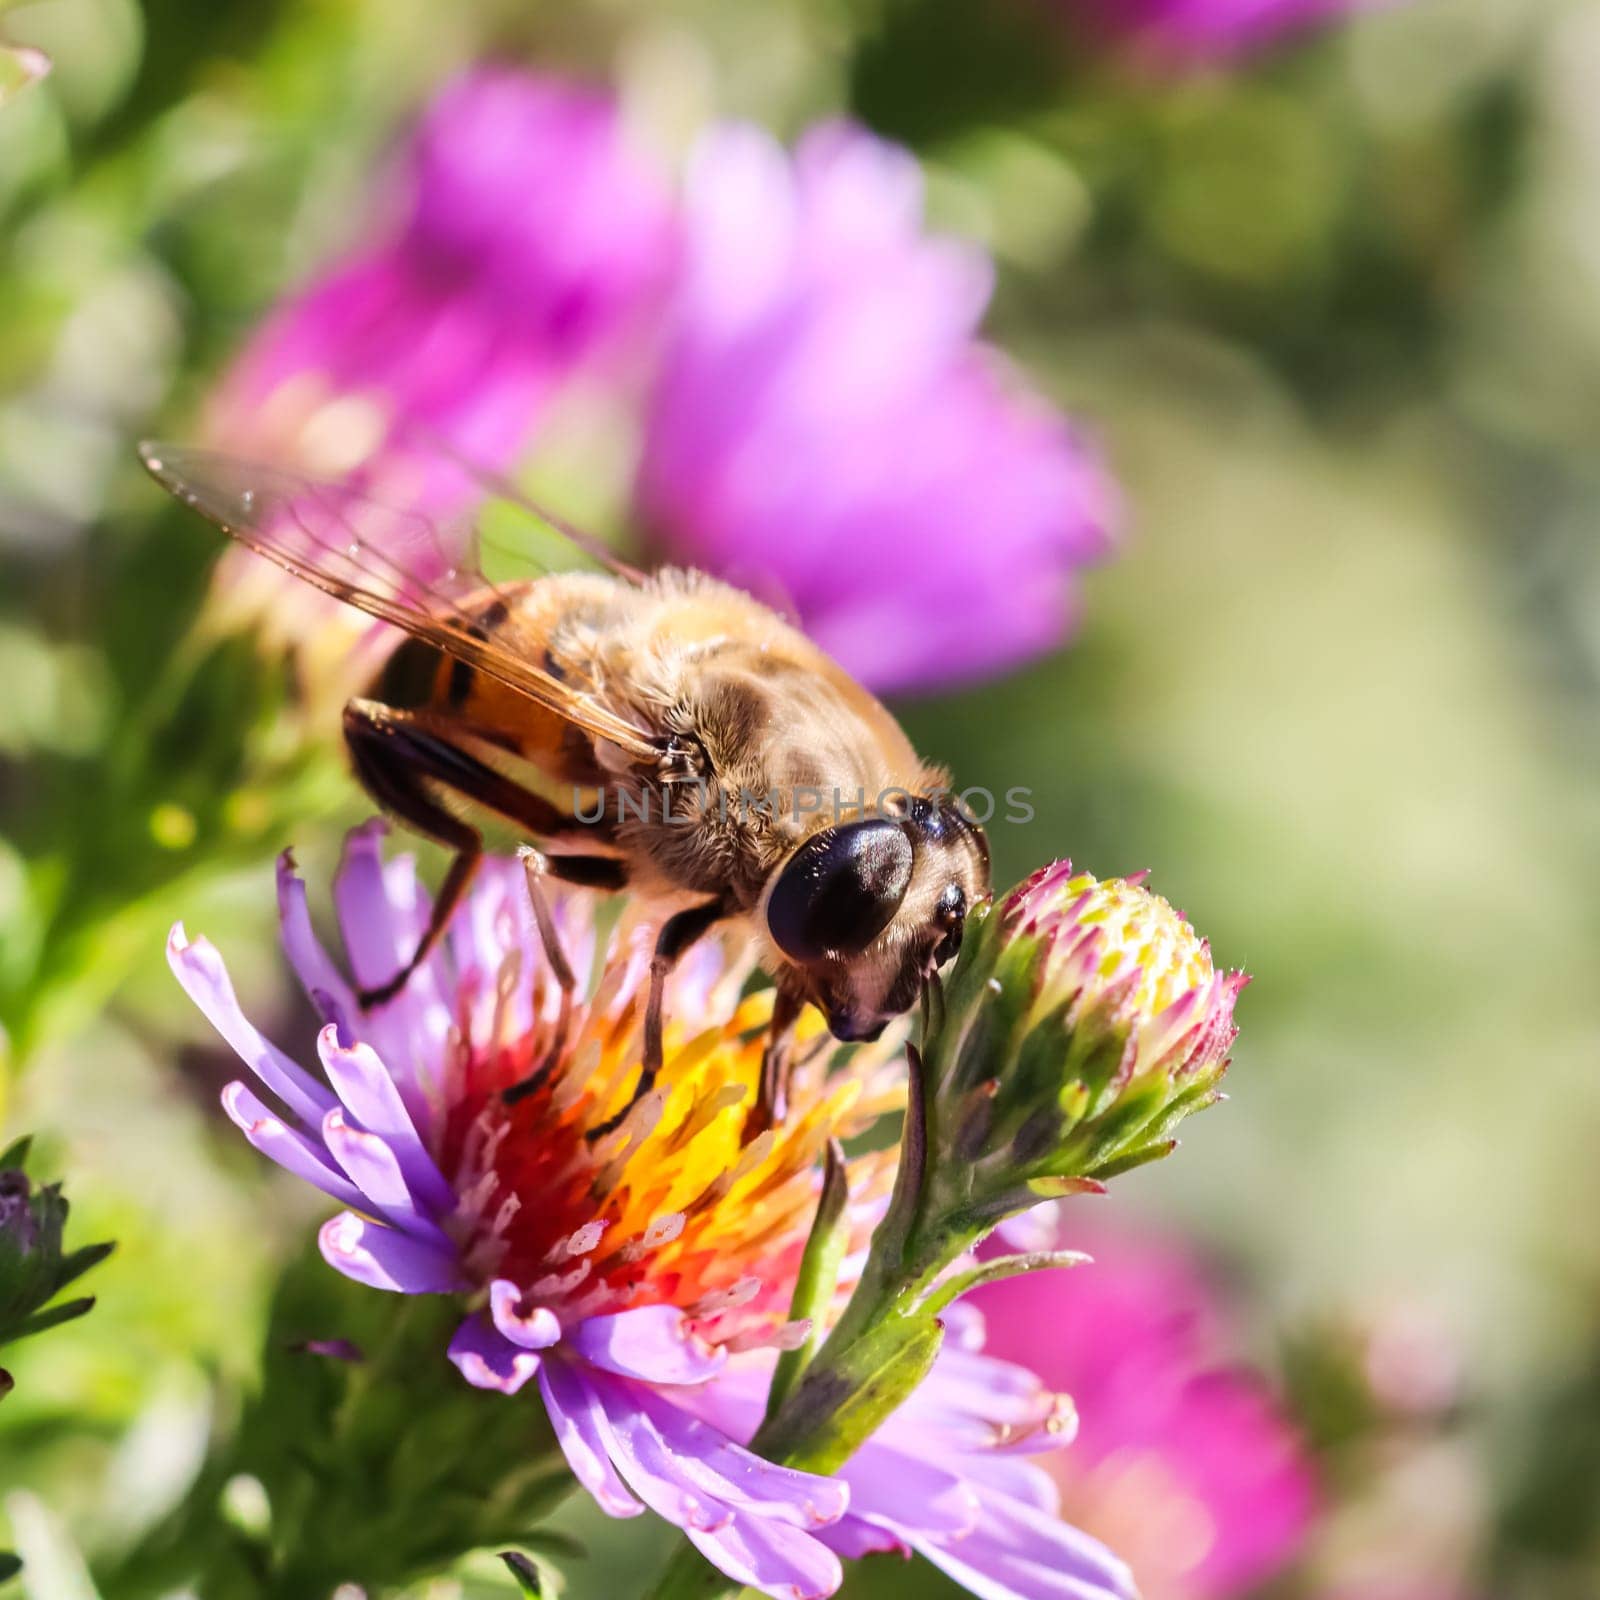 Worker bee on pink aster flowers in autumn garden by Olayola